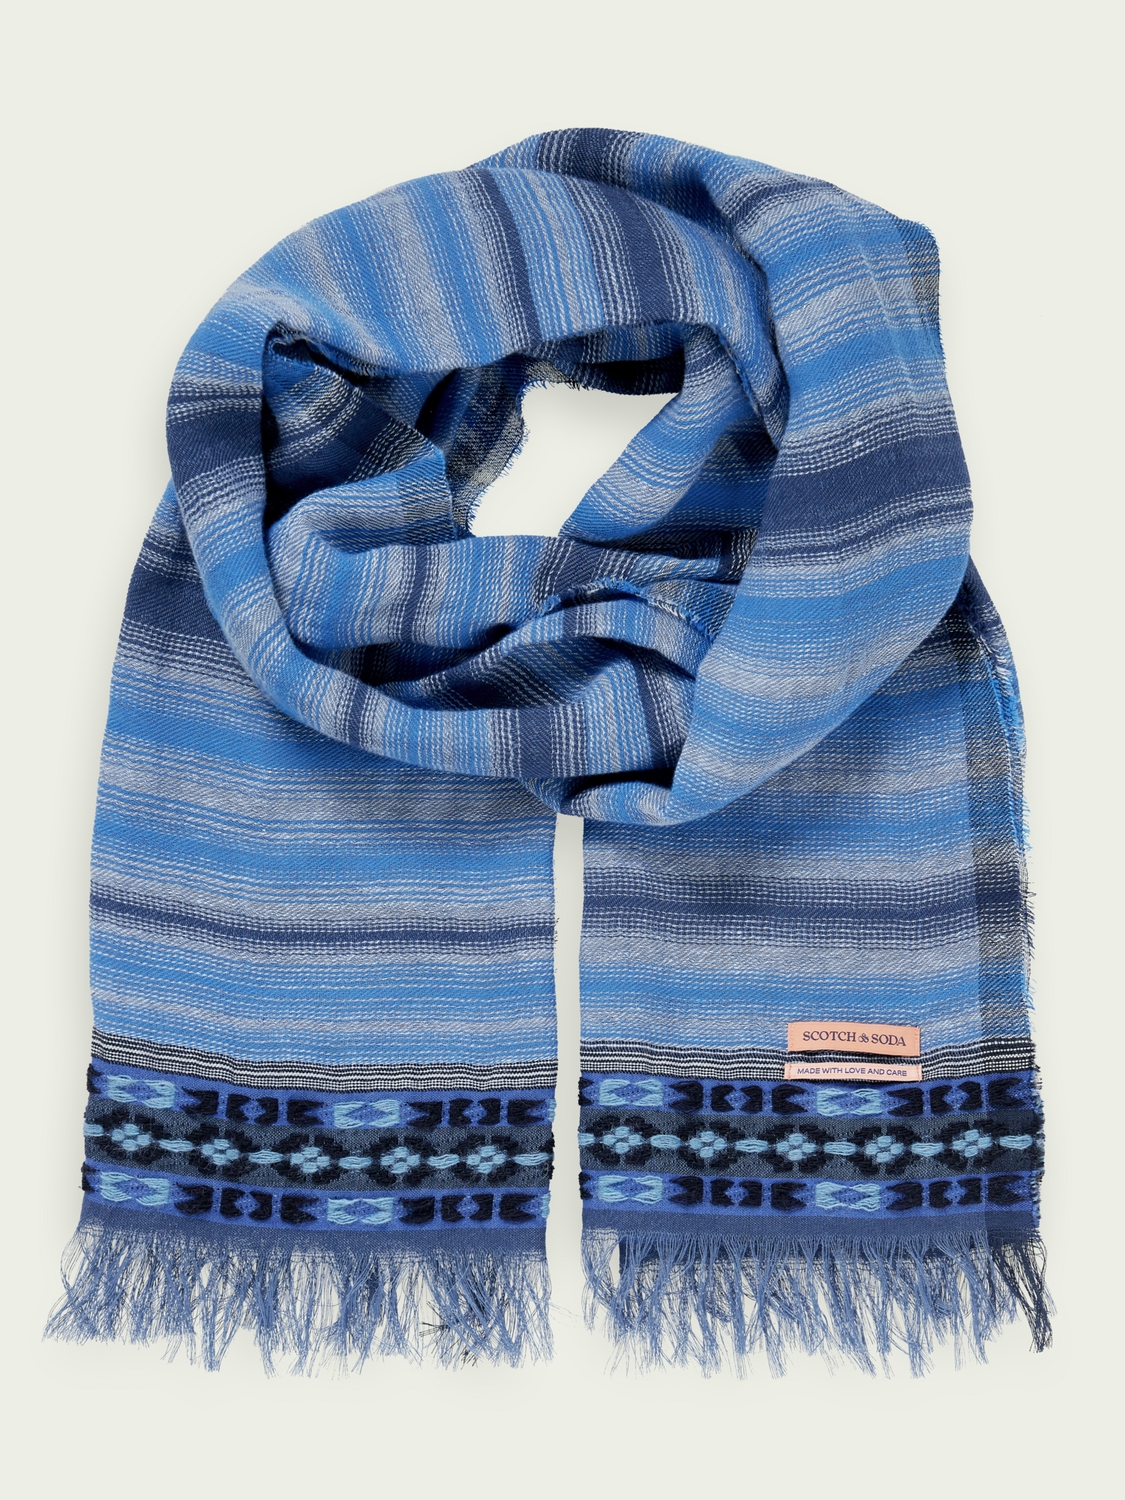 Scotch & Soda | Scarf in Organic Cotton and Linen blend 2